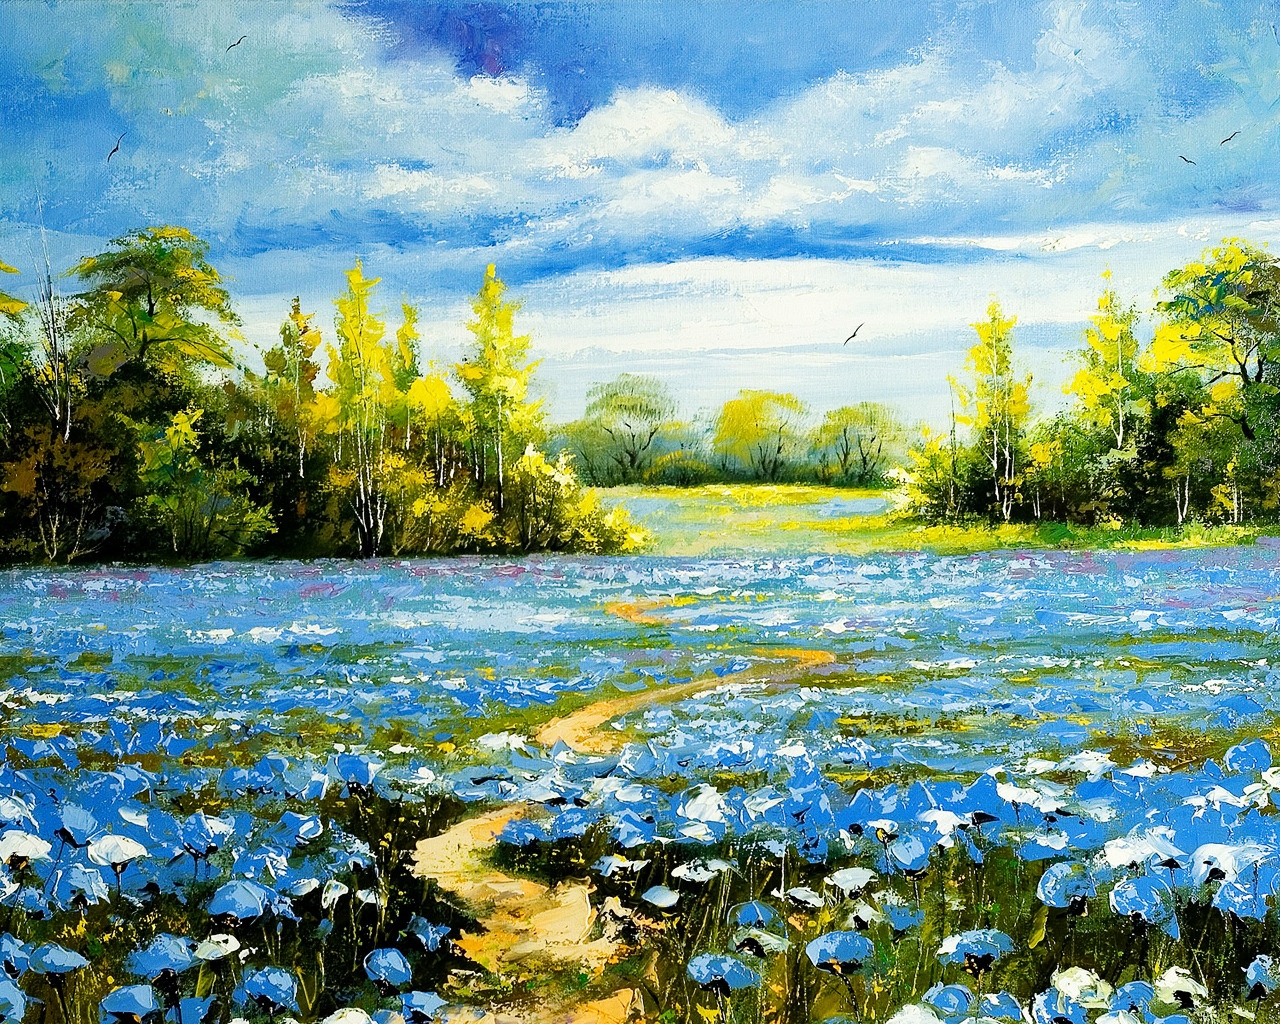 Landscape Oil Painting for 1280 x 1024 resolution